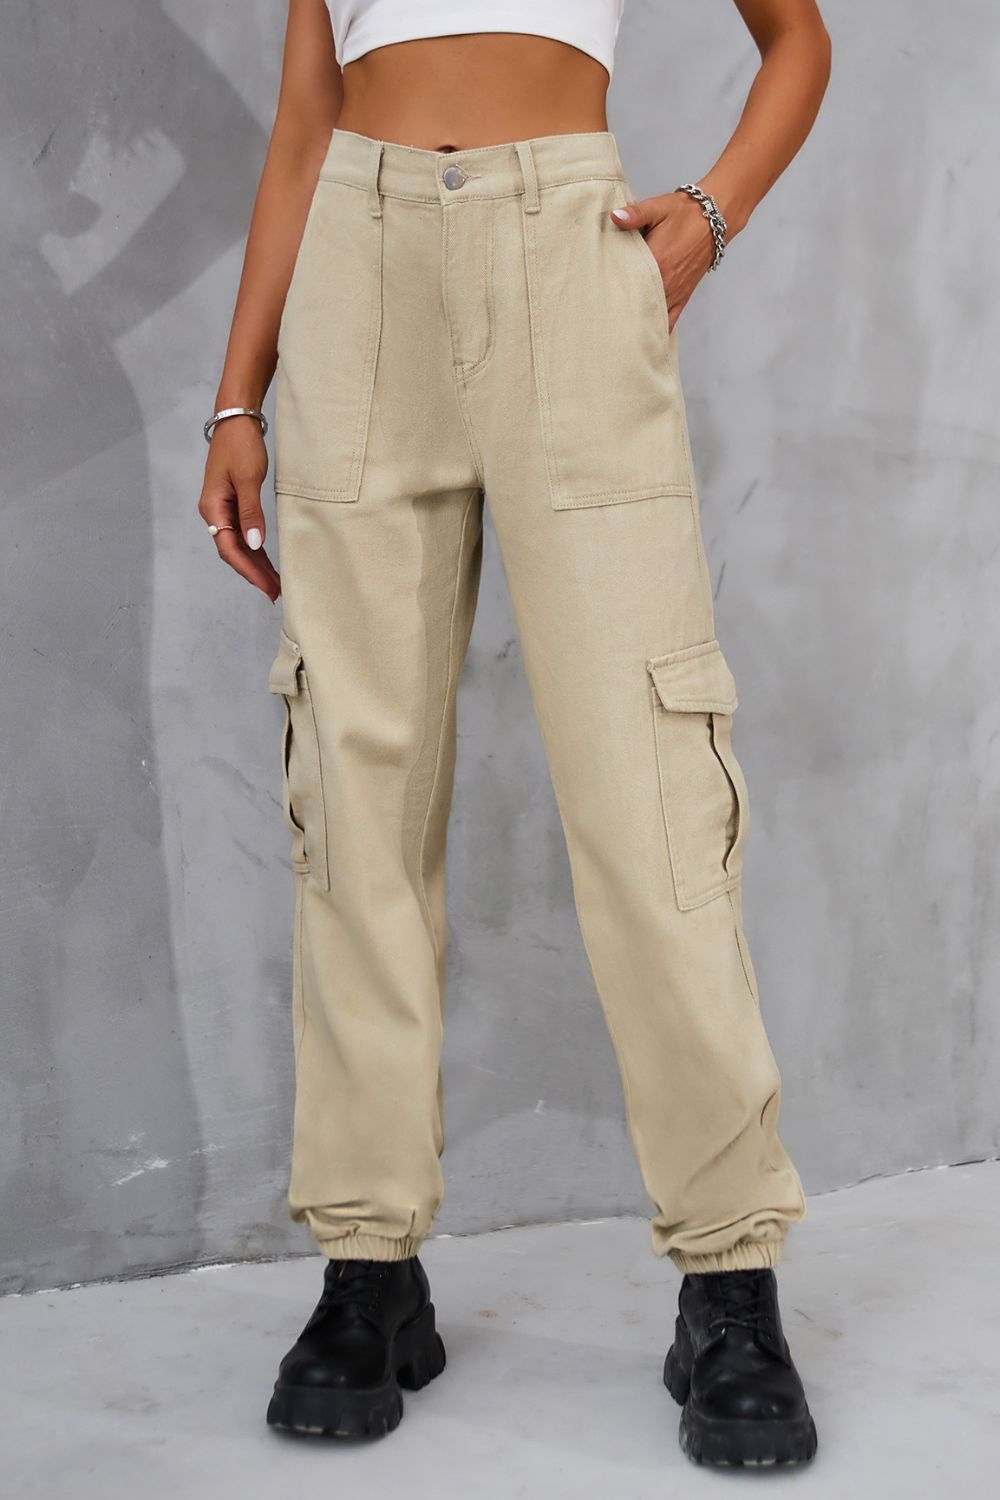 Buttoned High Waist Jeans with Pockets - Beige / S - Bottoms - Pants - 13 - 2024